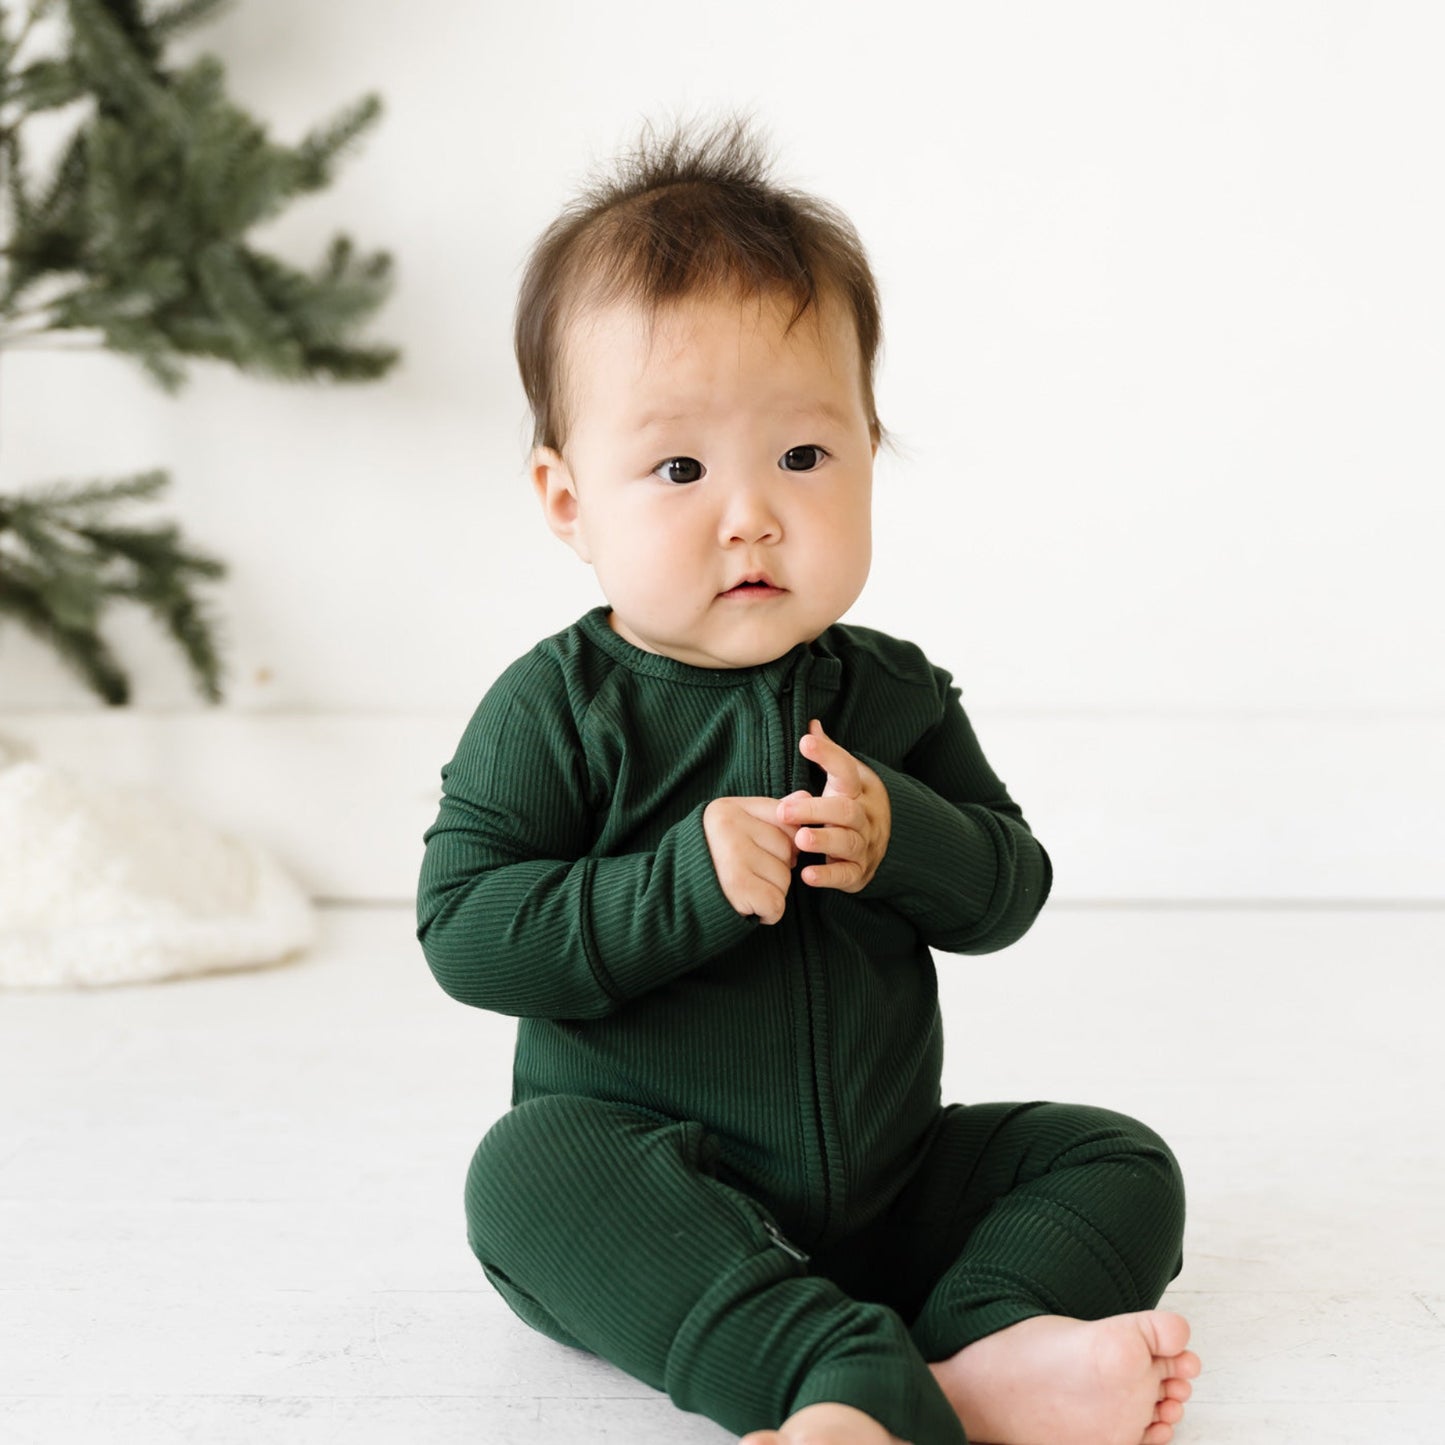 Forest Green Small Ribbed Zip Romper